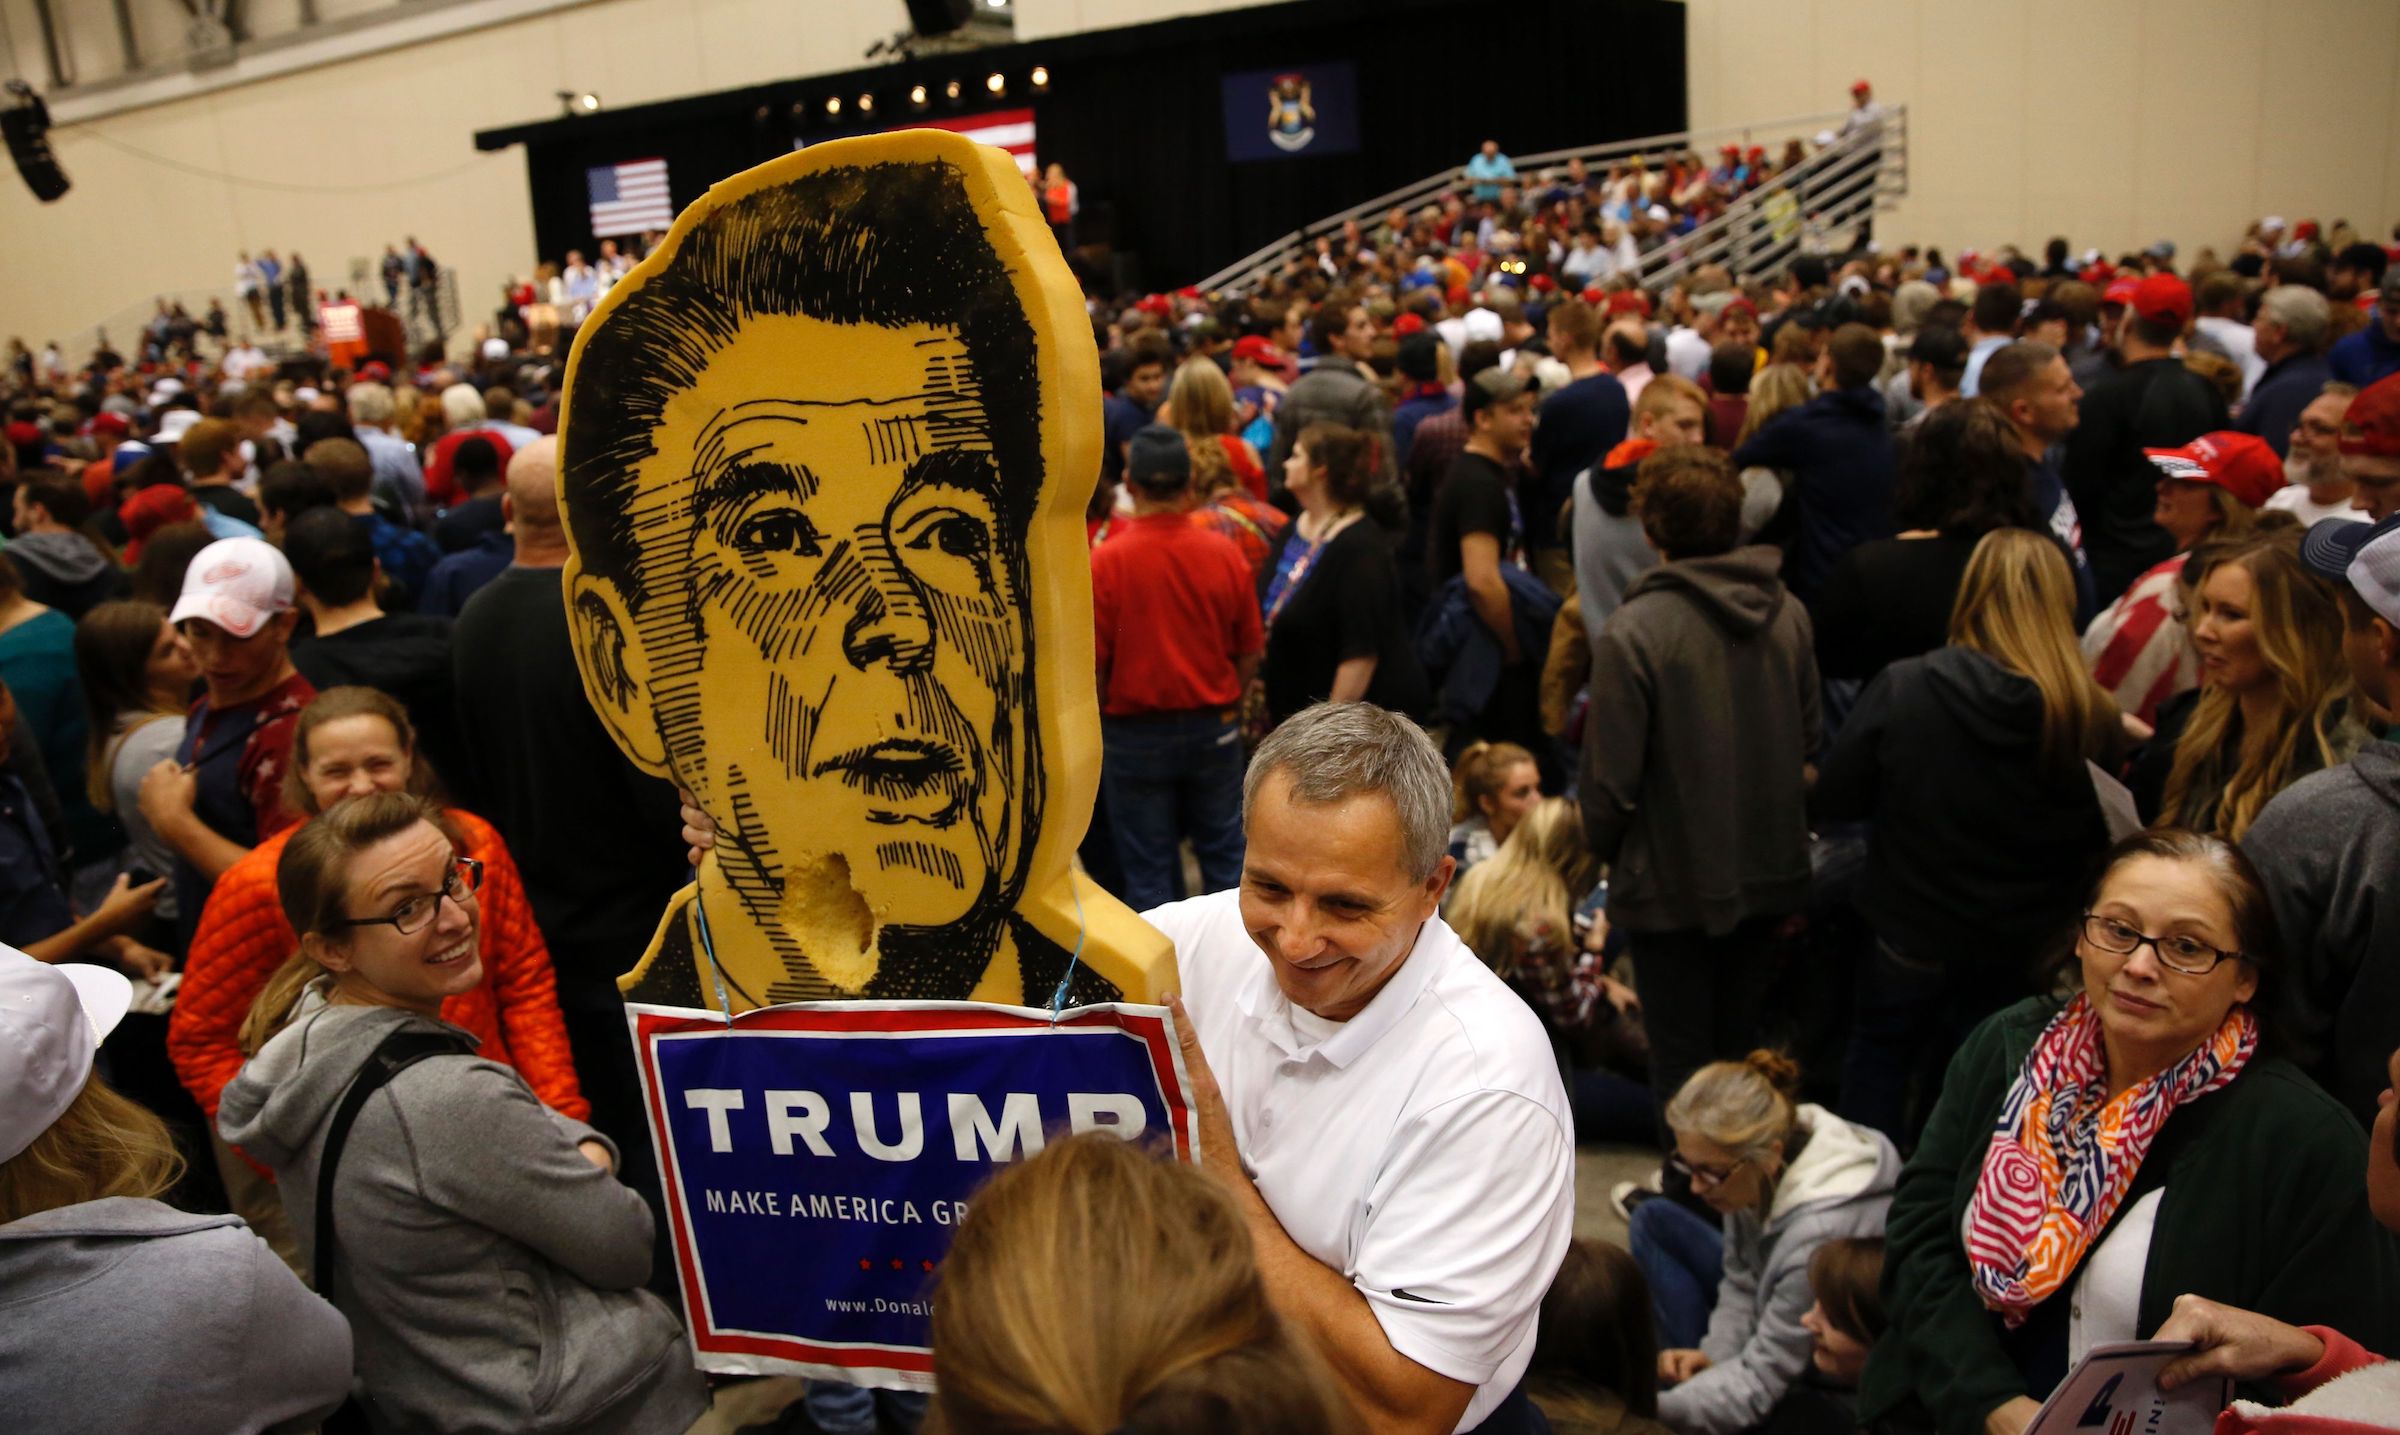 Ted Wright holds a foam campaign prop from 1980 of former U.S. President Ronald Reagan prior to the final campaign event of U.S. Republican Presidential candidate Donald Trump at Devos Place on November 7, 2016 in Grand Rapids, Michigan. (Jeff Kowalsky—AFP/Getty Images)